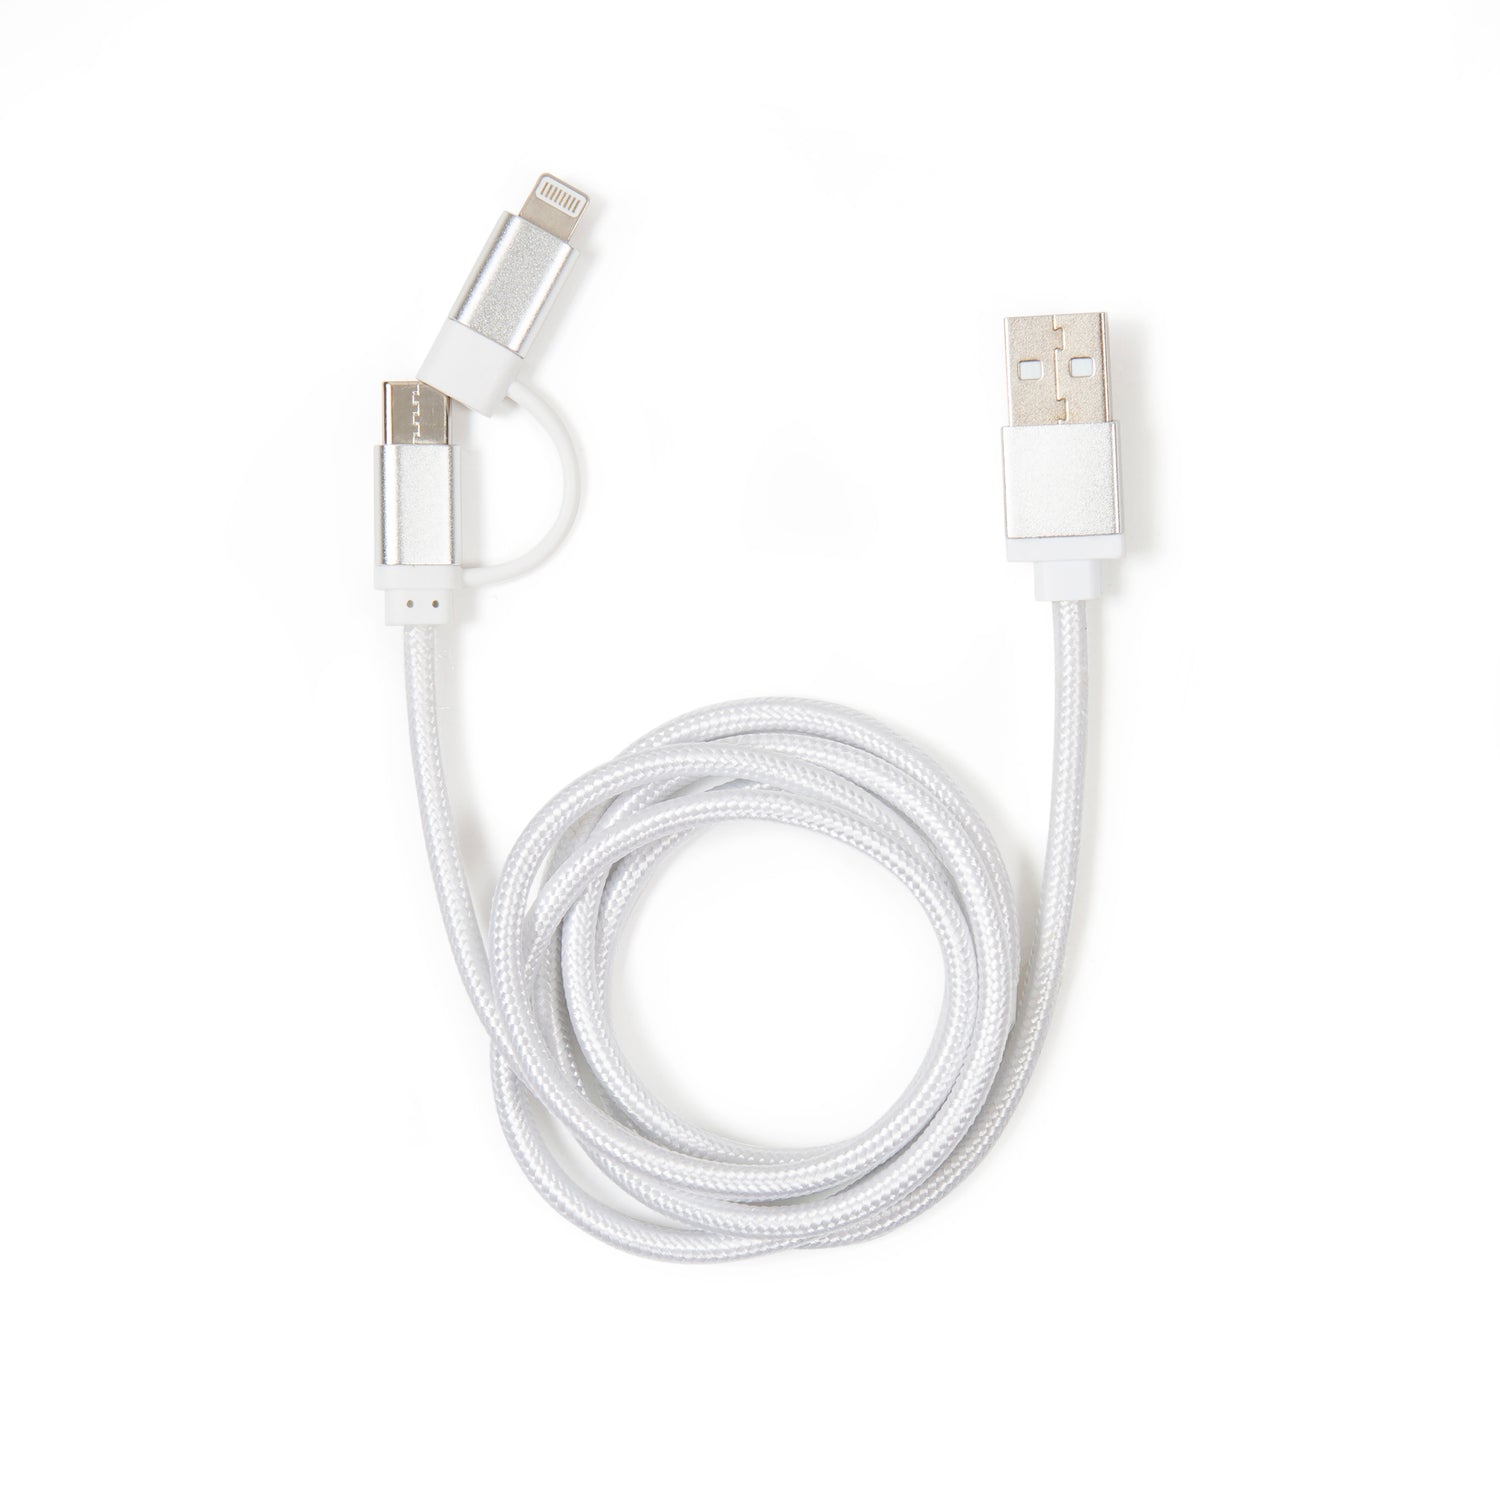 Silver 2-in-1 Braided Cable